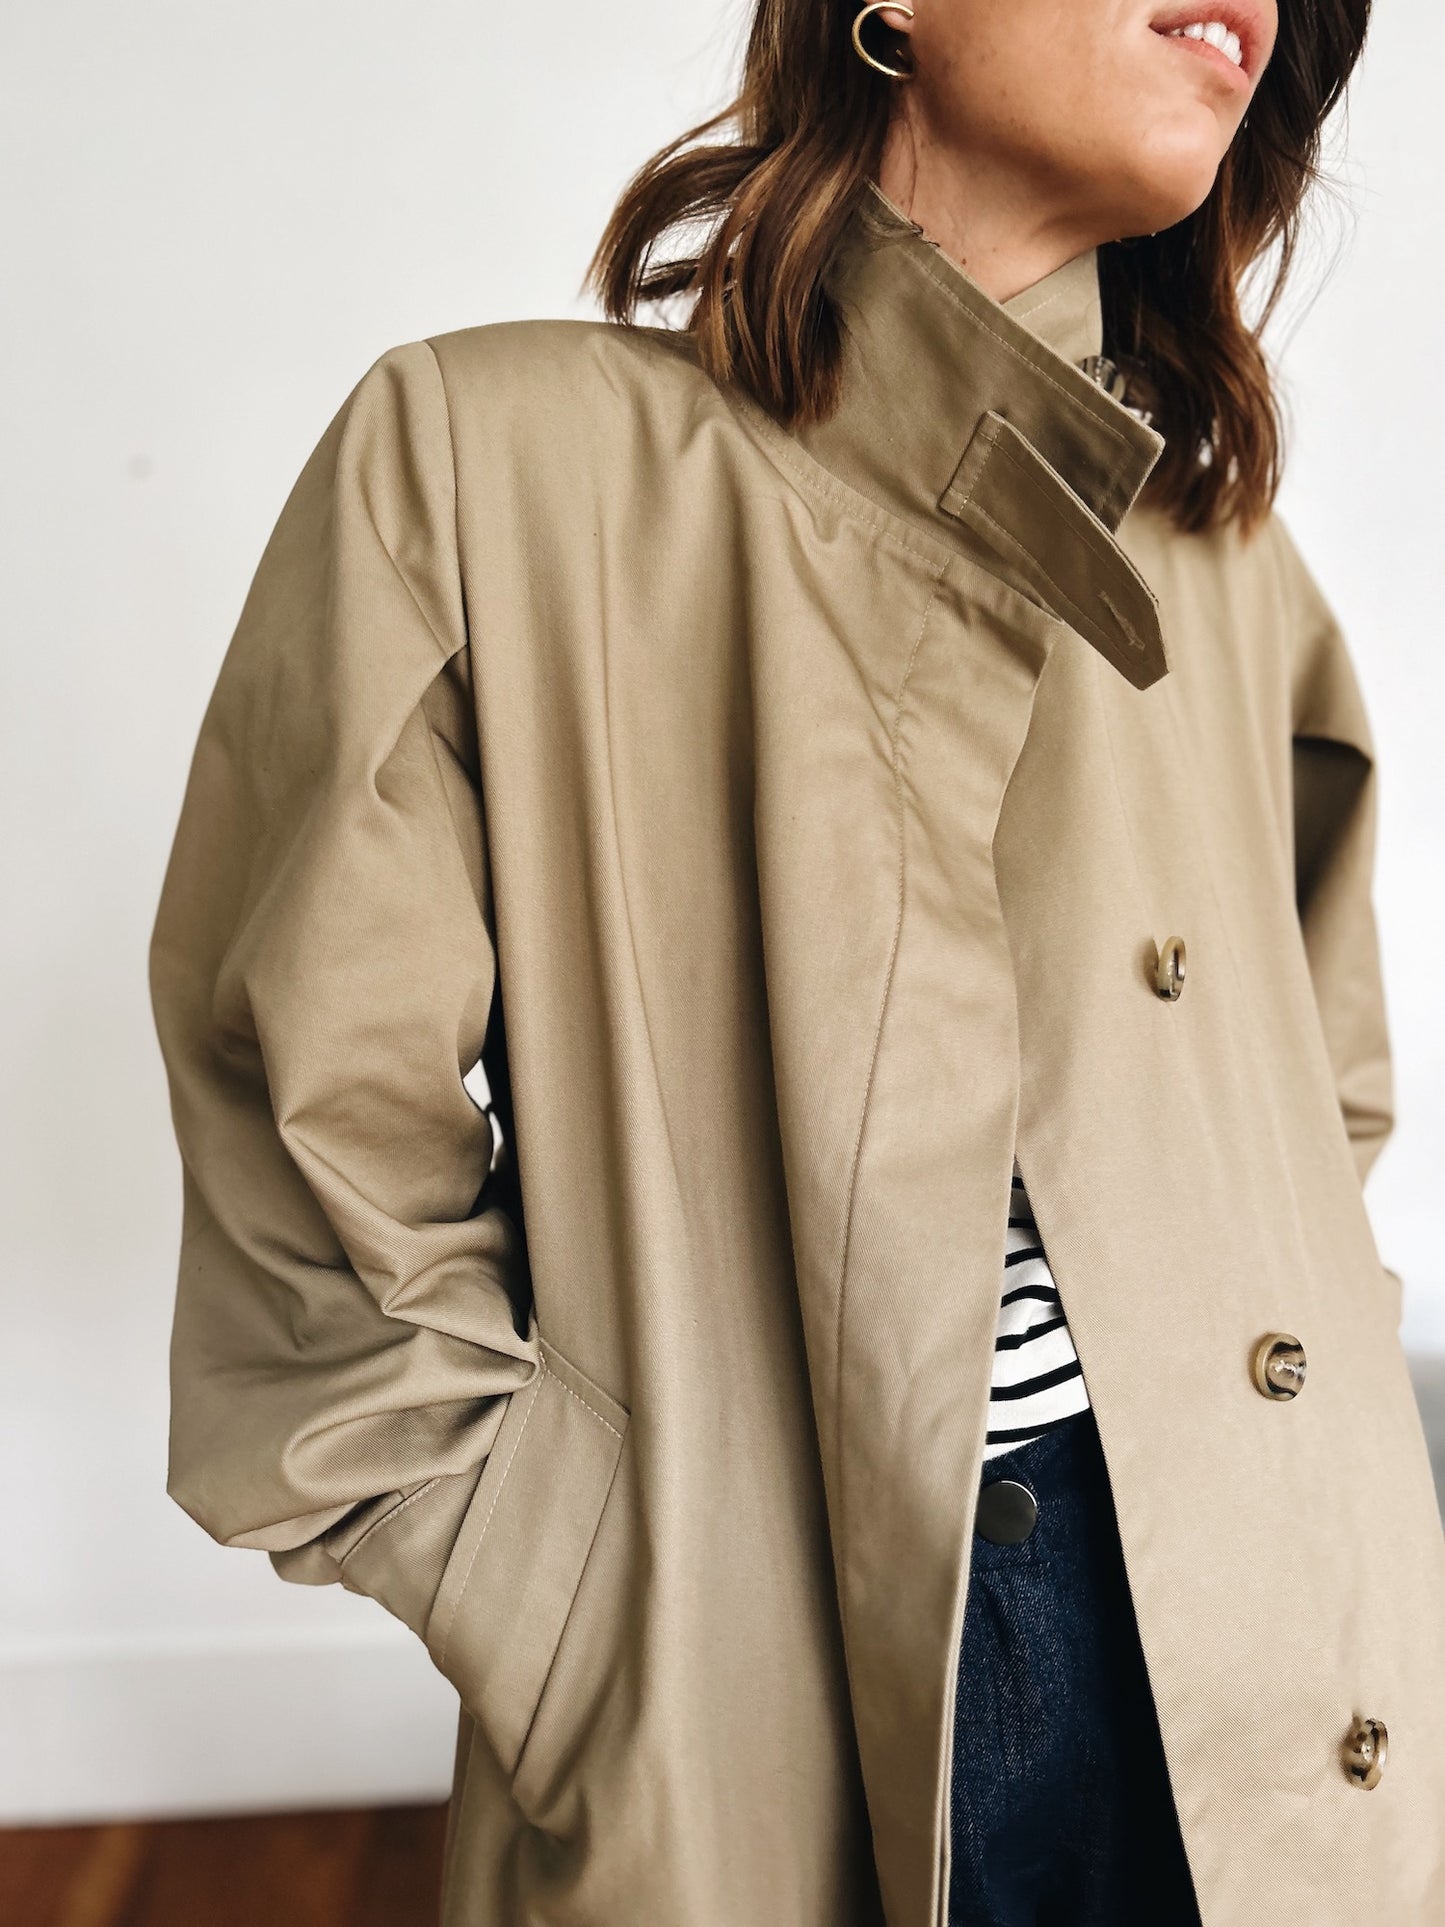 Will trench coat